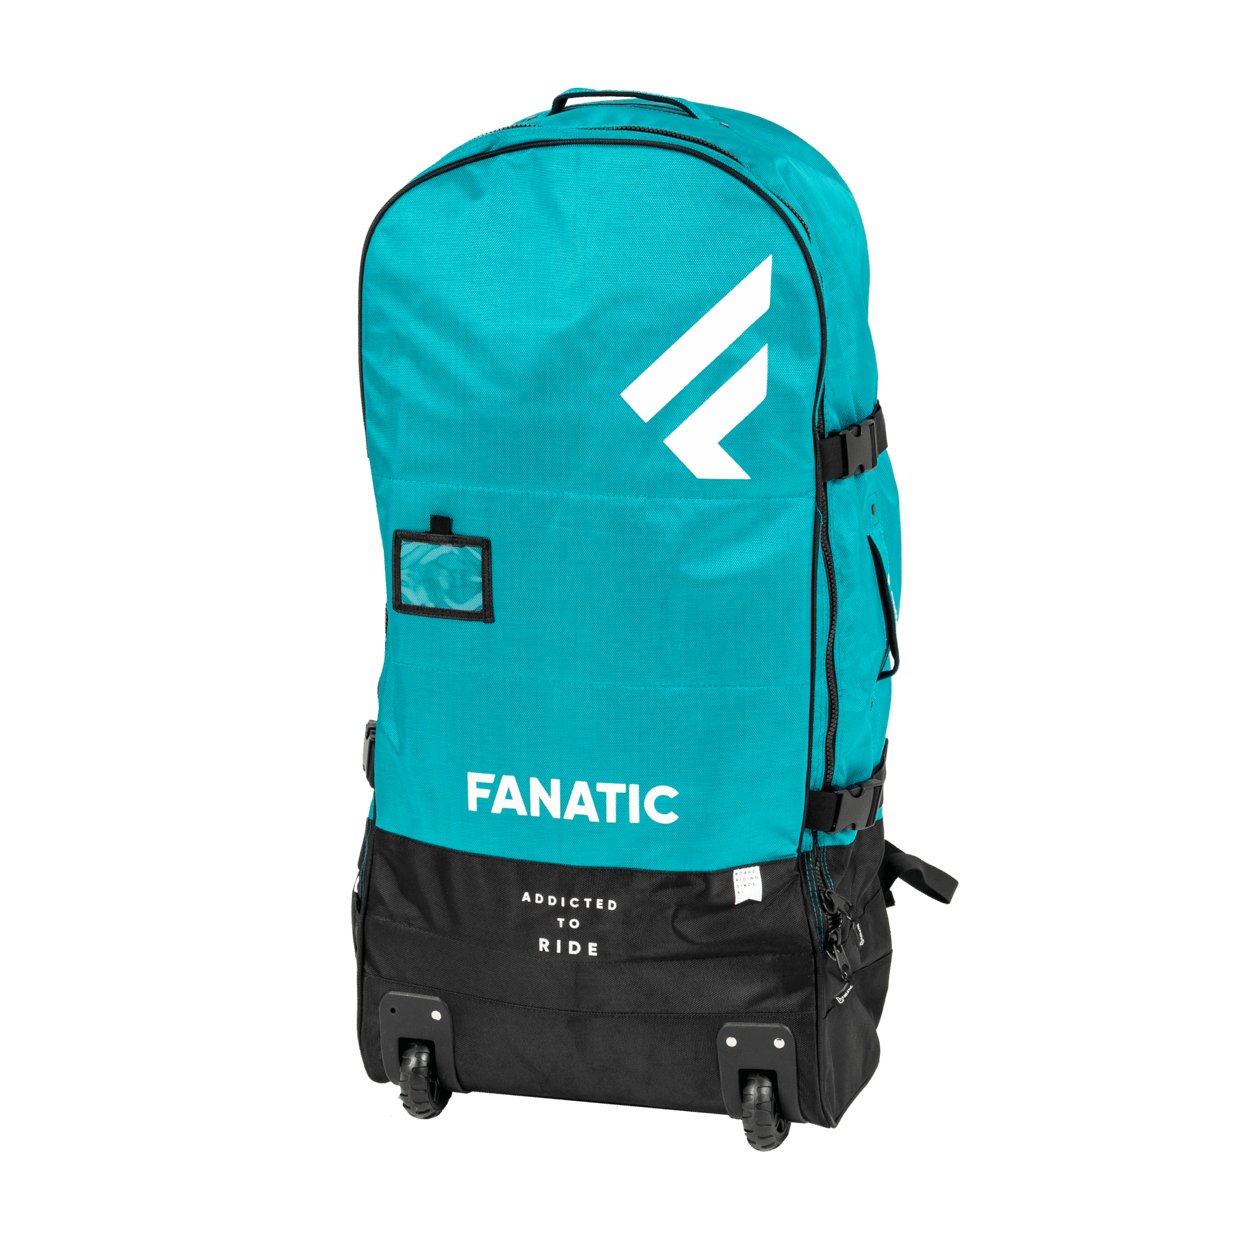 Fanatic Gearbag Fly Air Platform S 2023 - Worthing Watersports - 9008415934003 - Spareparts - Fanatic SUP